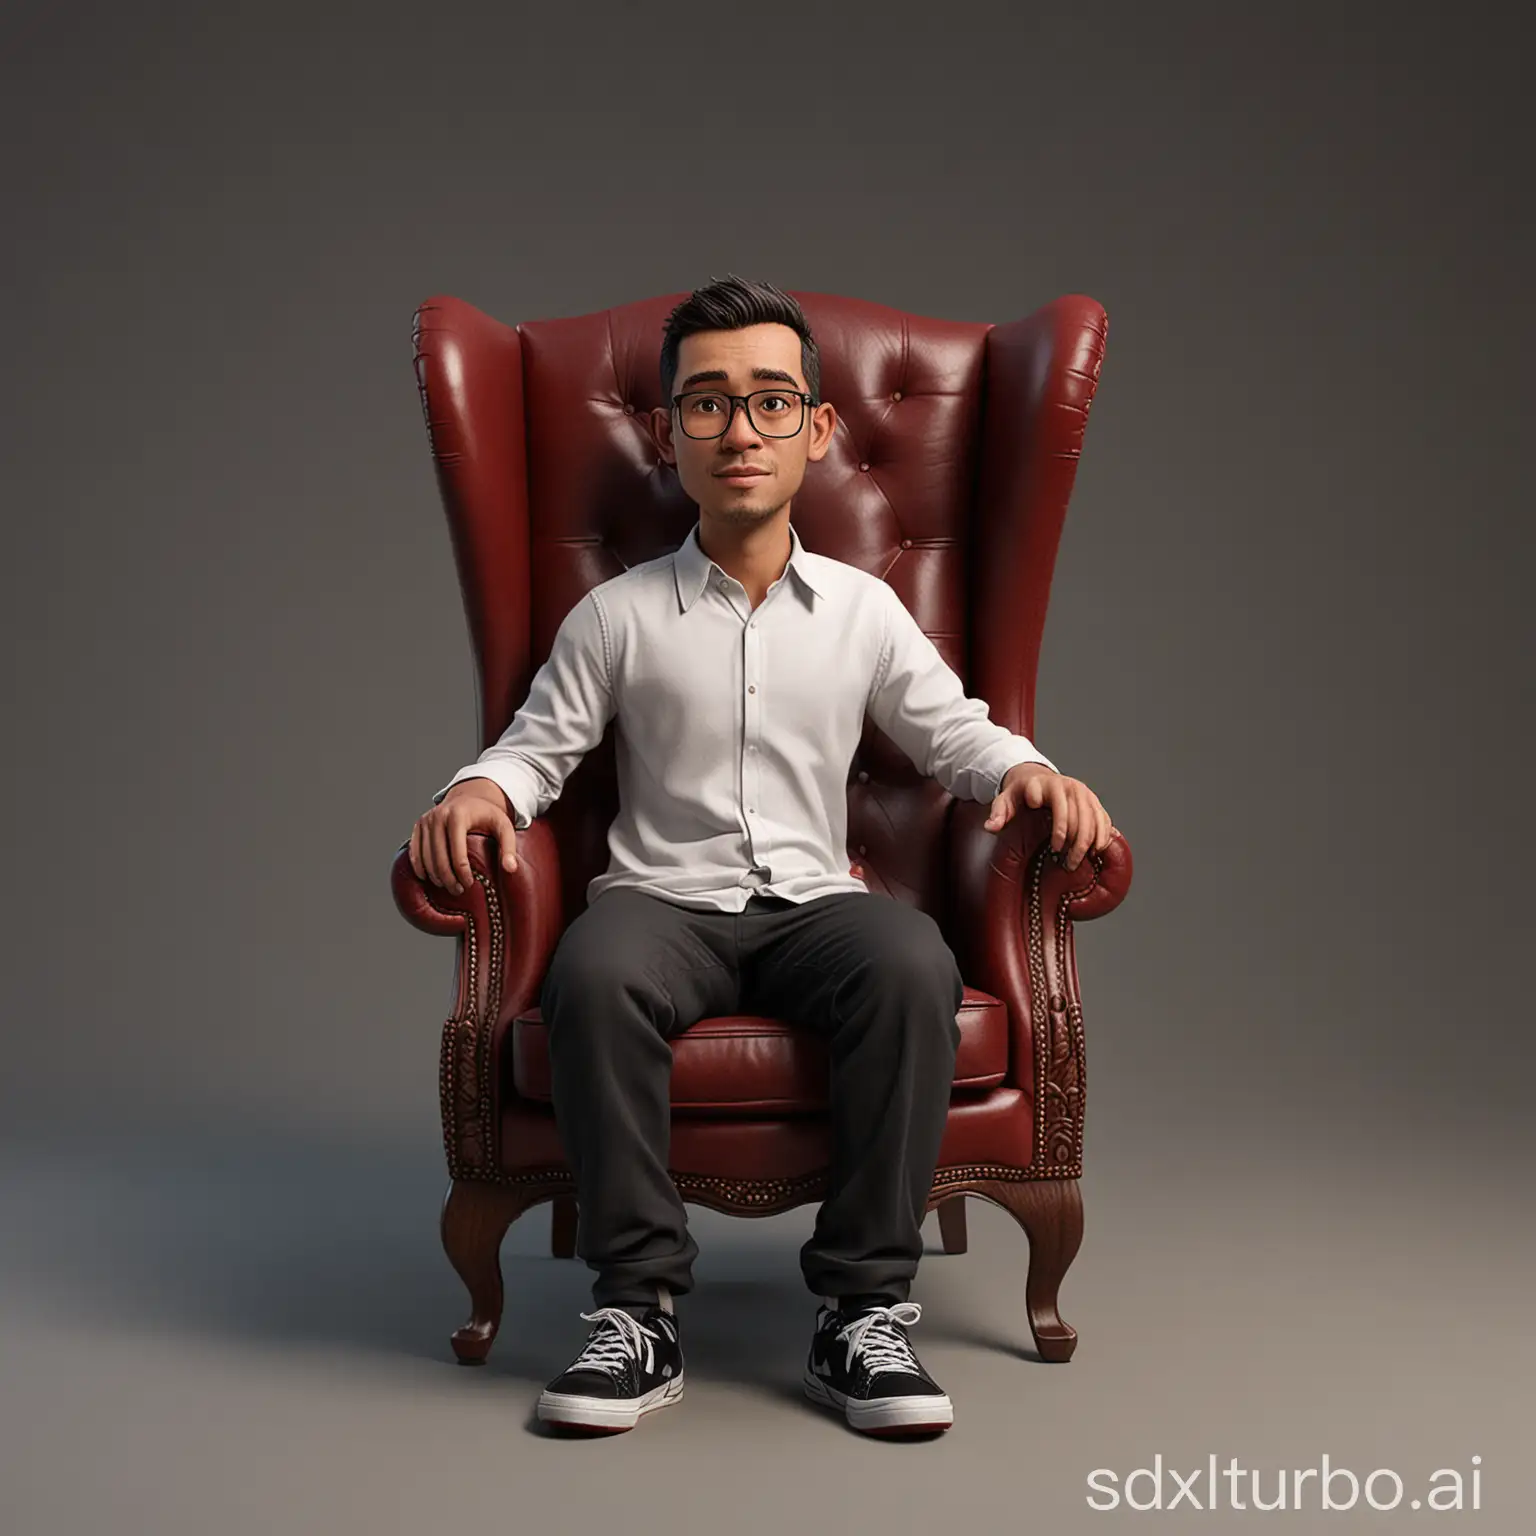 Indonesian-Male-Photographer-in-Classic-Red-Wingback-Chair-with-Camera